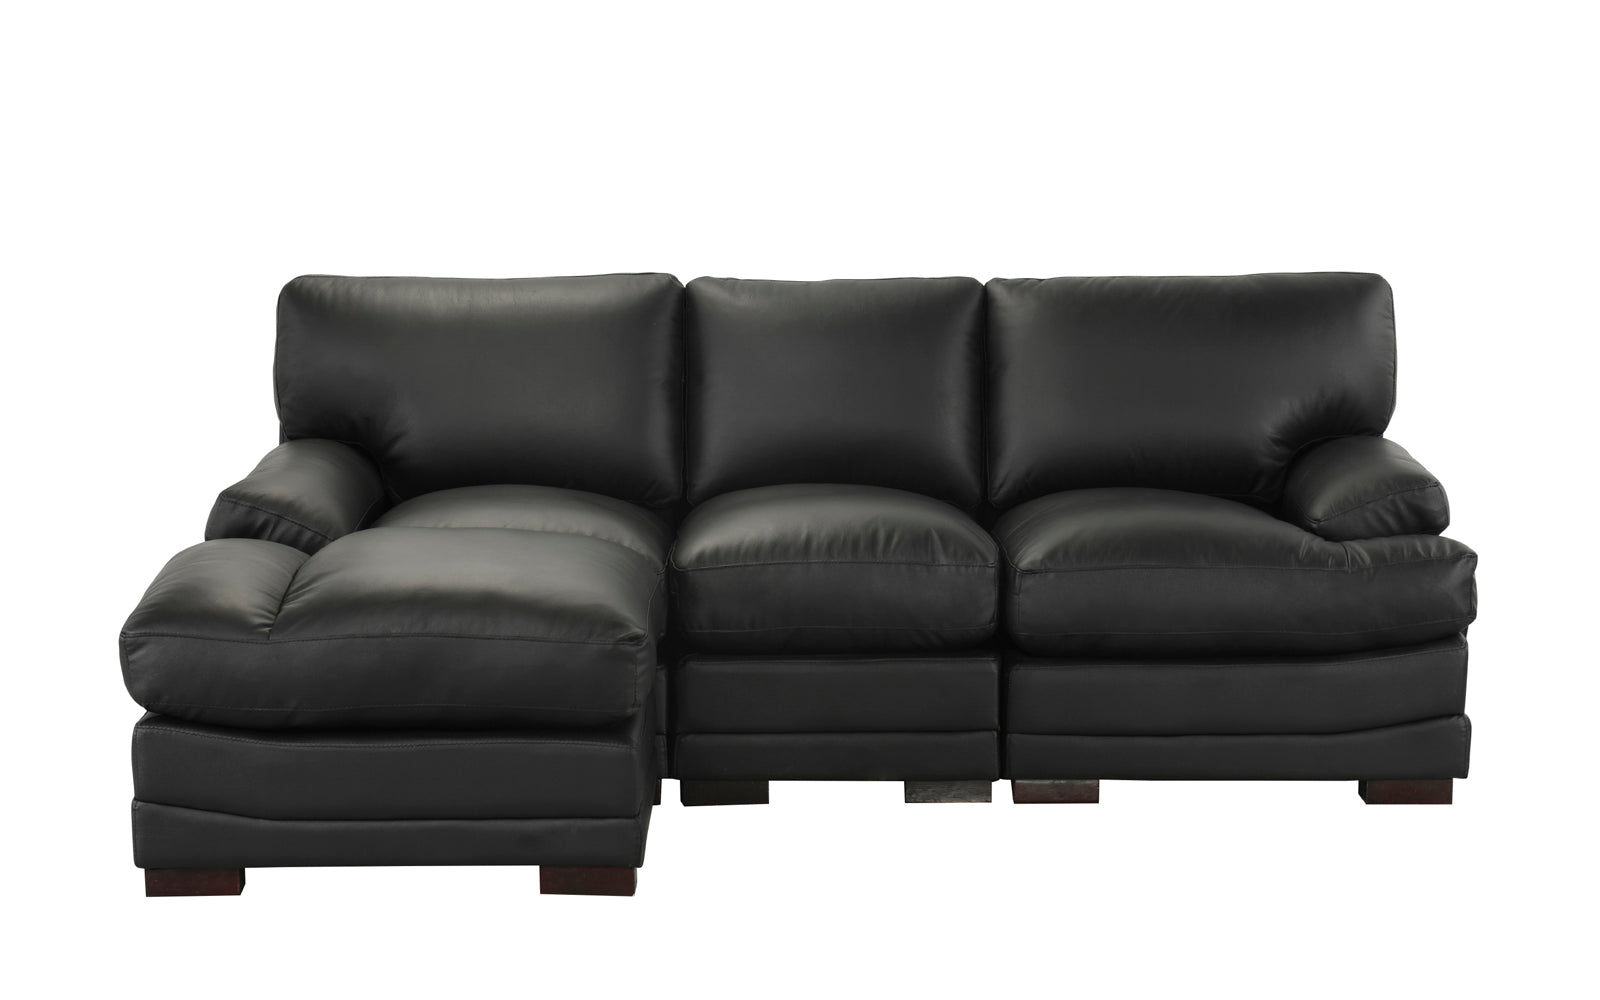 Silas Leather Match Sectional Sofa With Left Facing Chaise